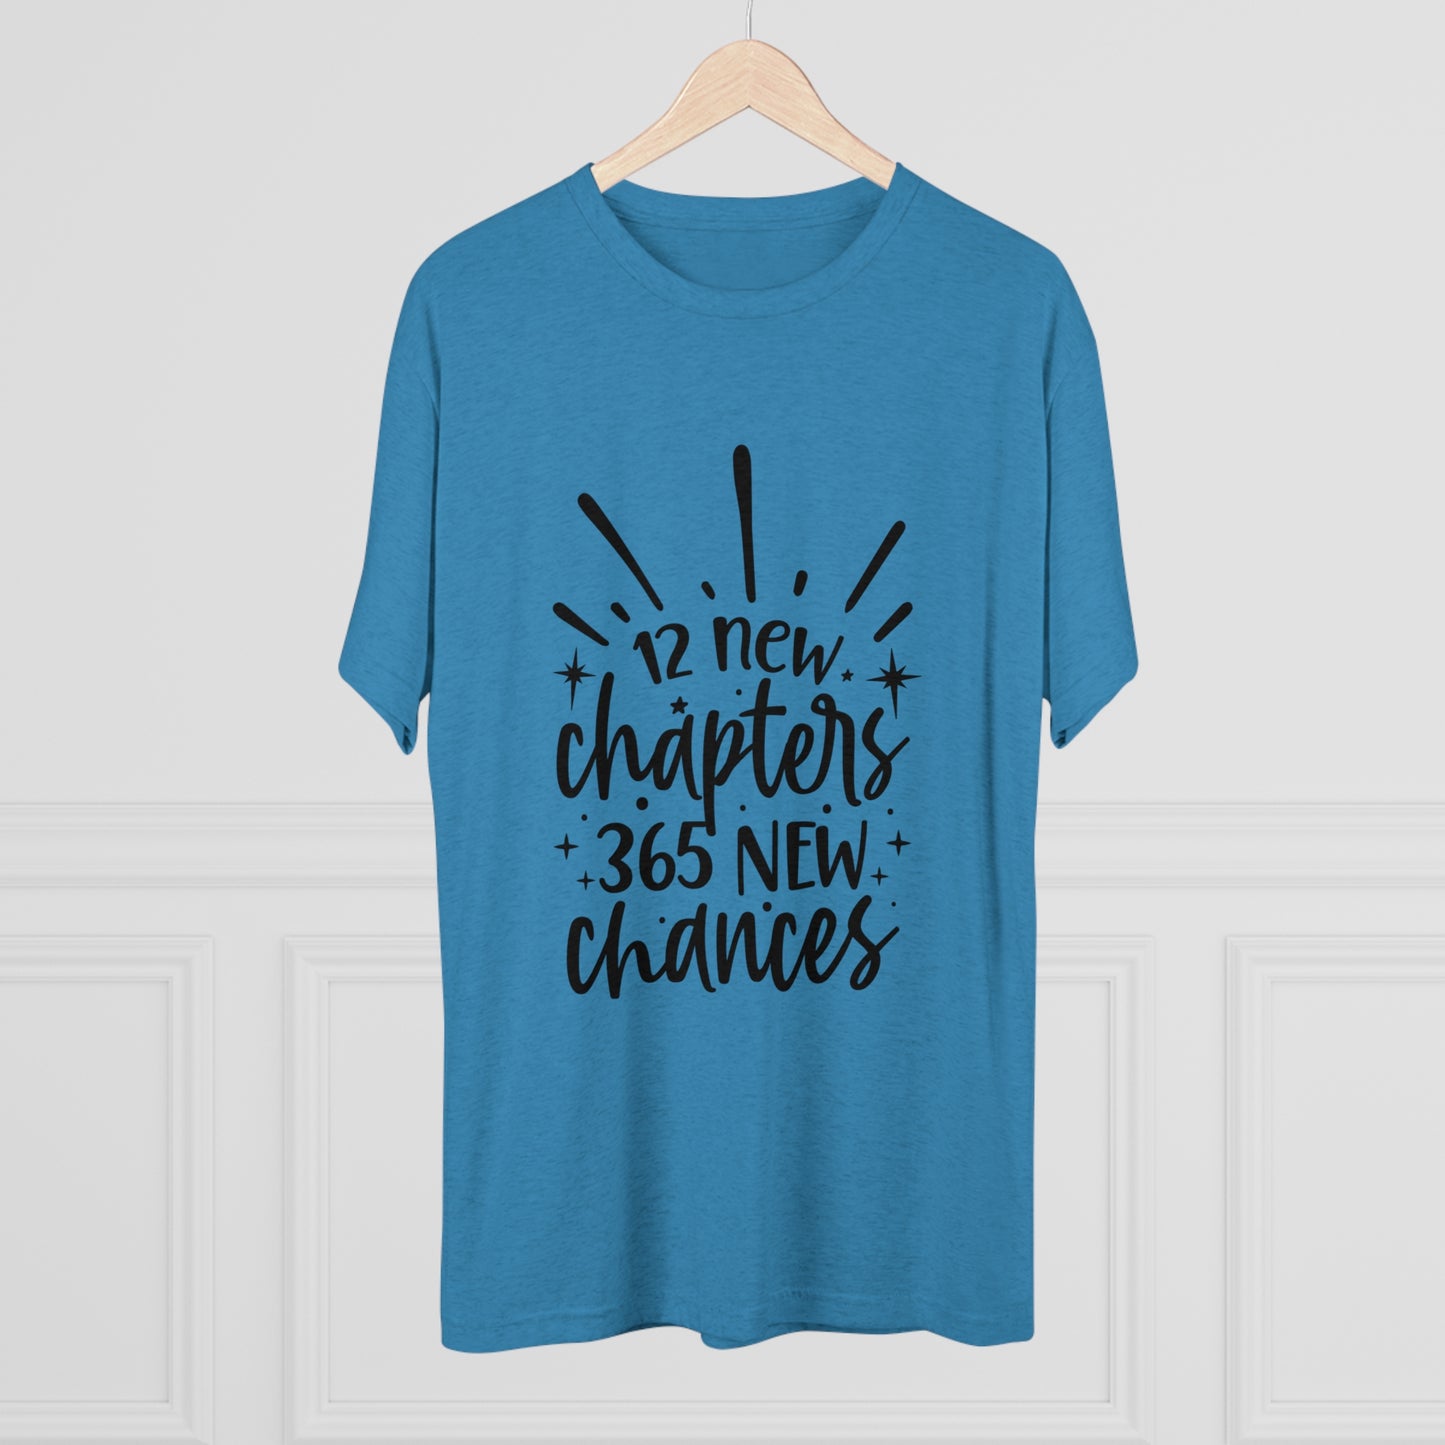 12 New Chapters Unisex Tri-Blend Crew Tee